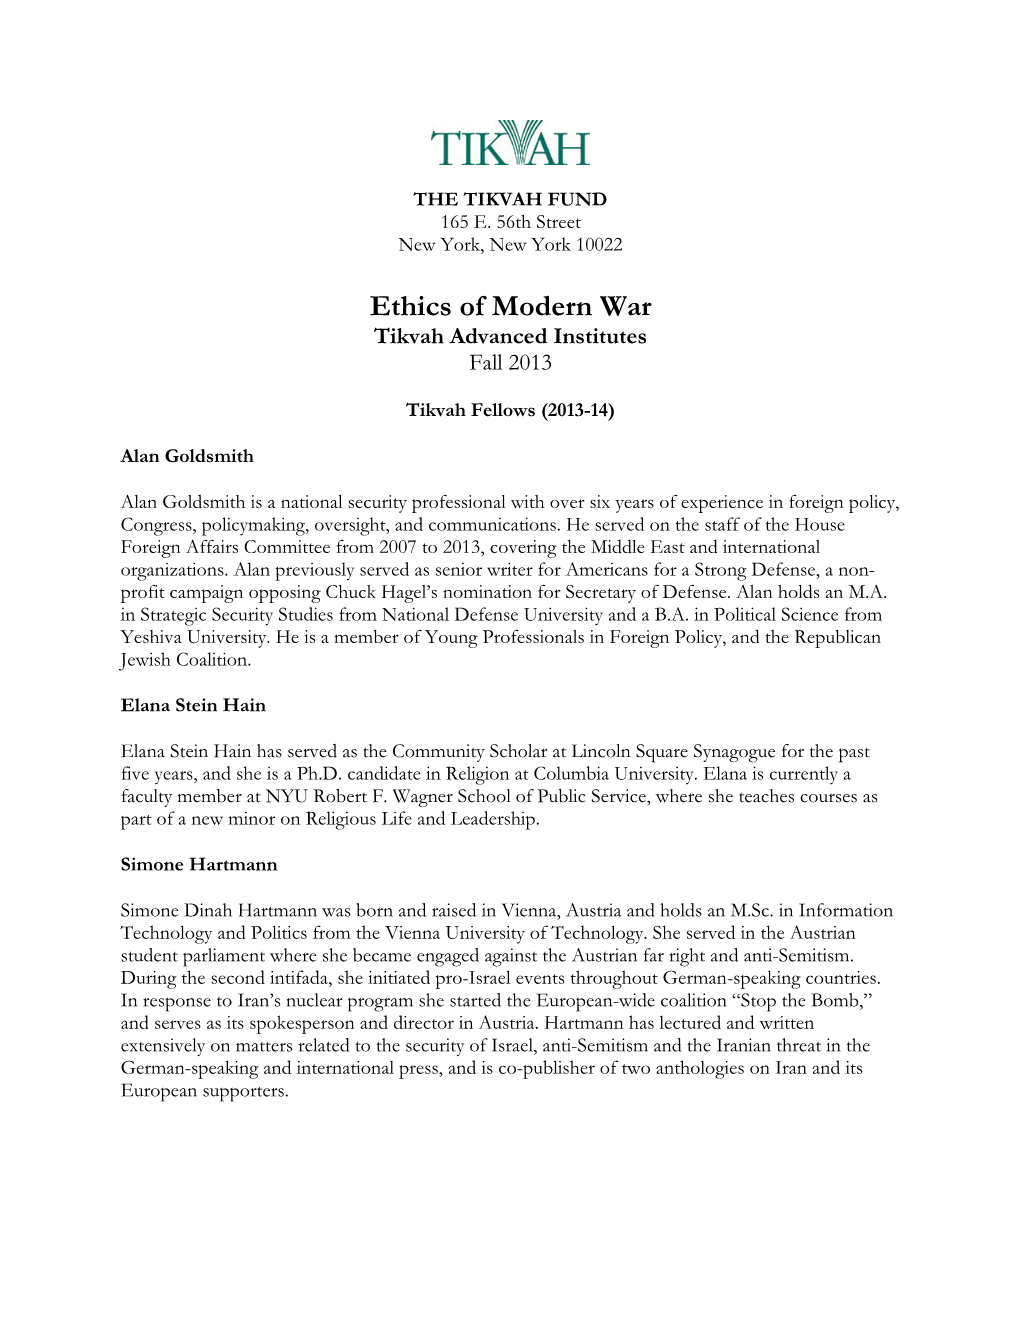 Ethics of Modern War Tikvah Advanced Institutes Fall 2013